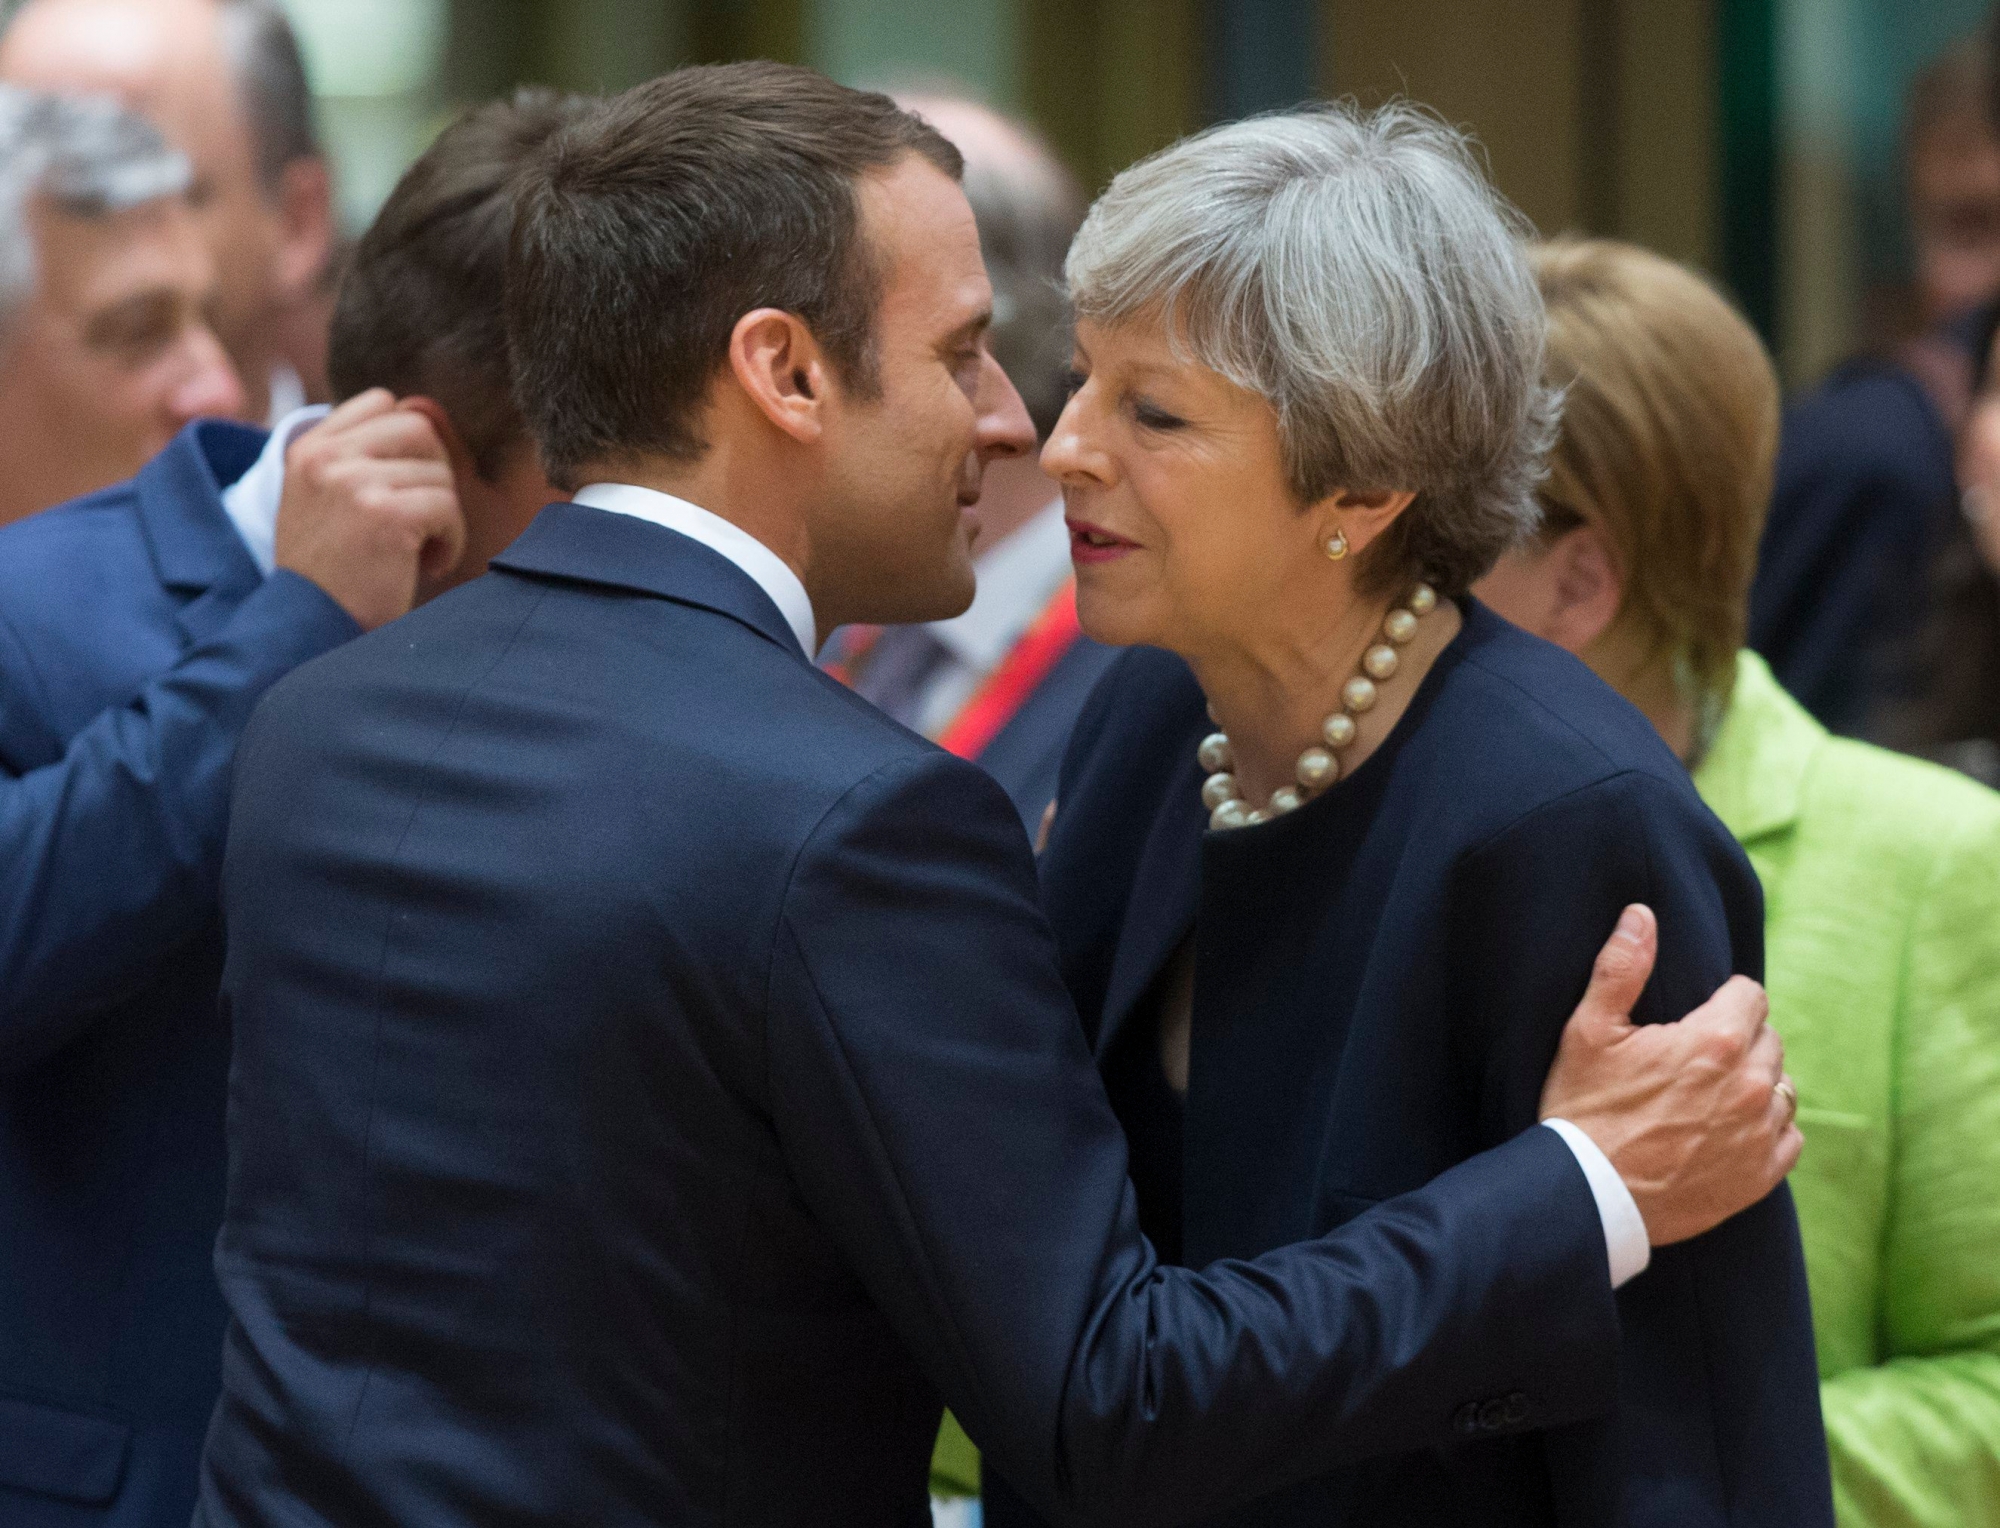 epa06043291 (L-R) French President Emmanuel Macron and Britain's Prime Minister Theresa May prepare for the start of a European Council meeting in Brussels, Belgium, 22 June 2017. European heads of states and governments gather for a two-days European Council meeting on 22 and 23 June which will mainly 'focus on the ongoing efforts to strengthen the European Union and protect its citizens through the work on counterterrorism, security and defence, external borders, illegal migration and economic development', the European Councils said in a press release.  EPA/OLIVIER HOSLET BELGIUM EU SUMMIT